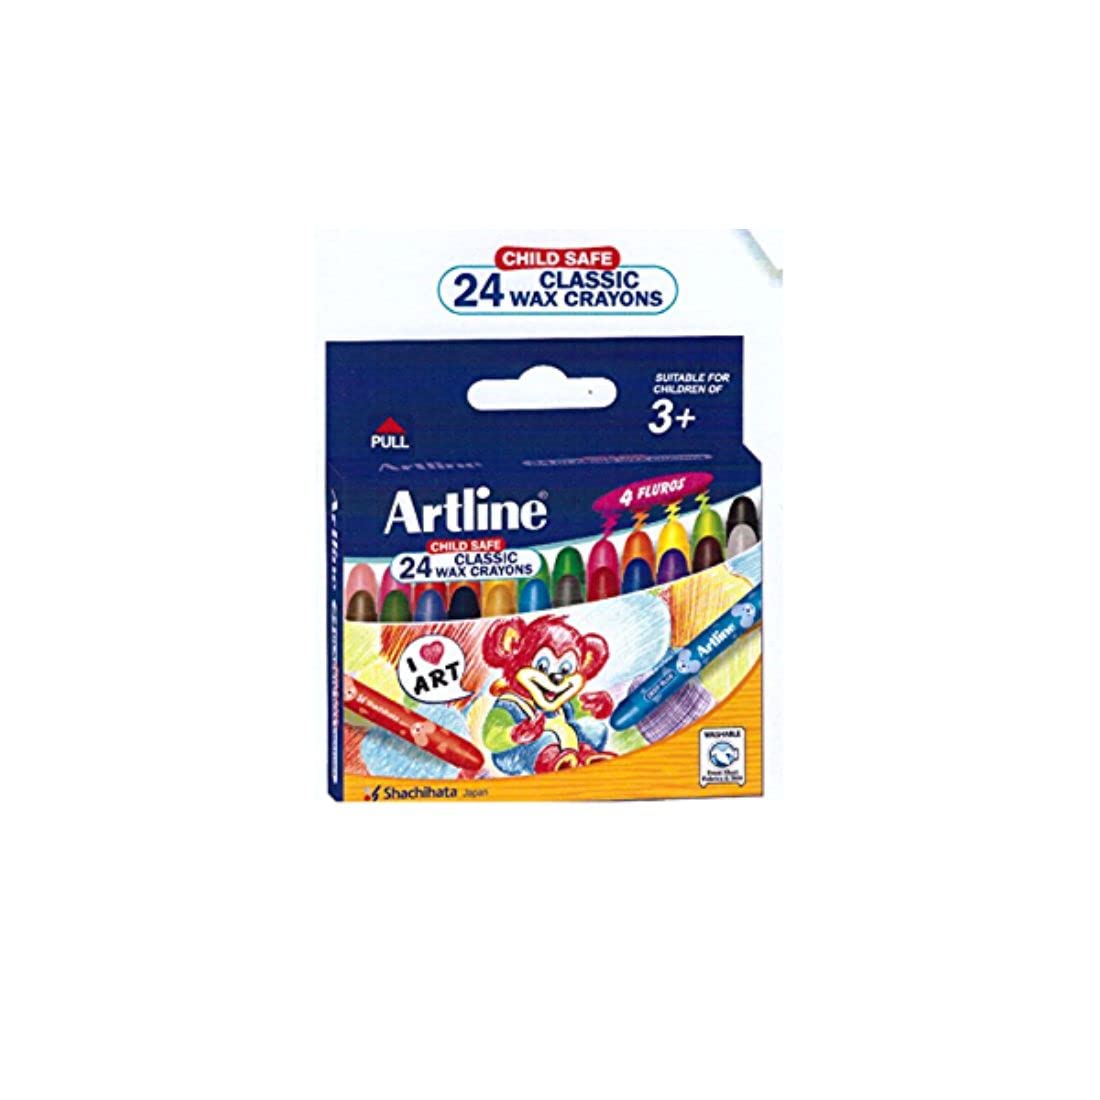 Artline Classic Wax Crayon Pack Of 24 - 57Mm